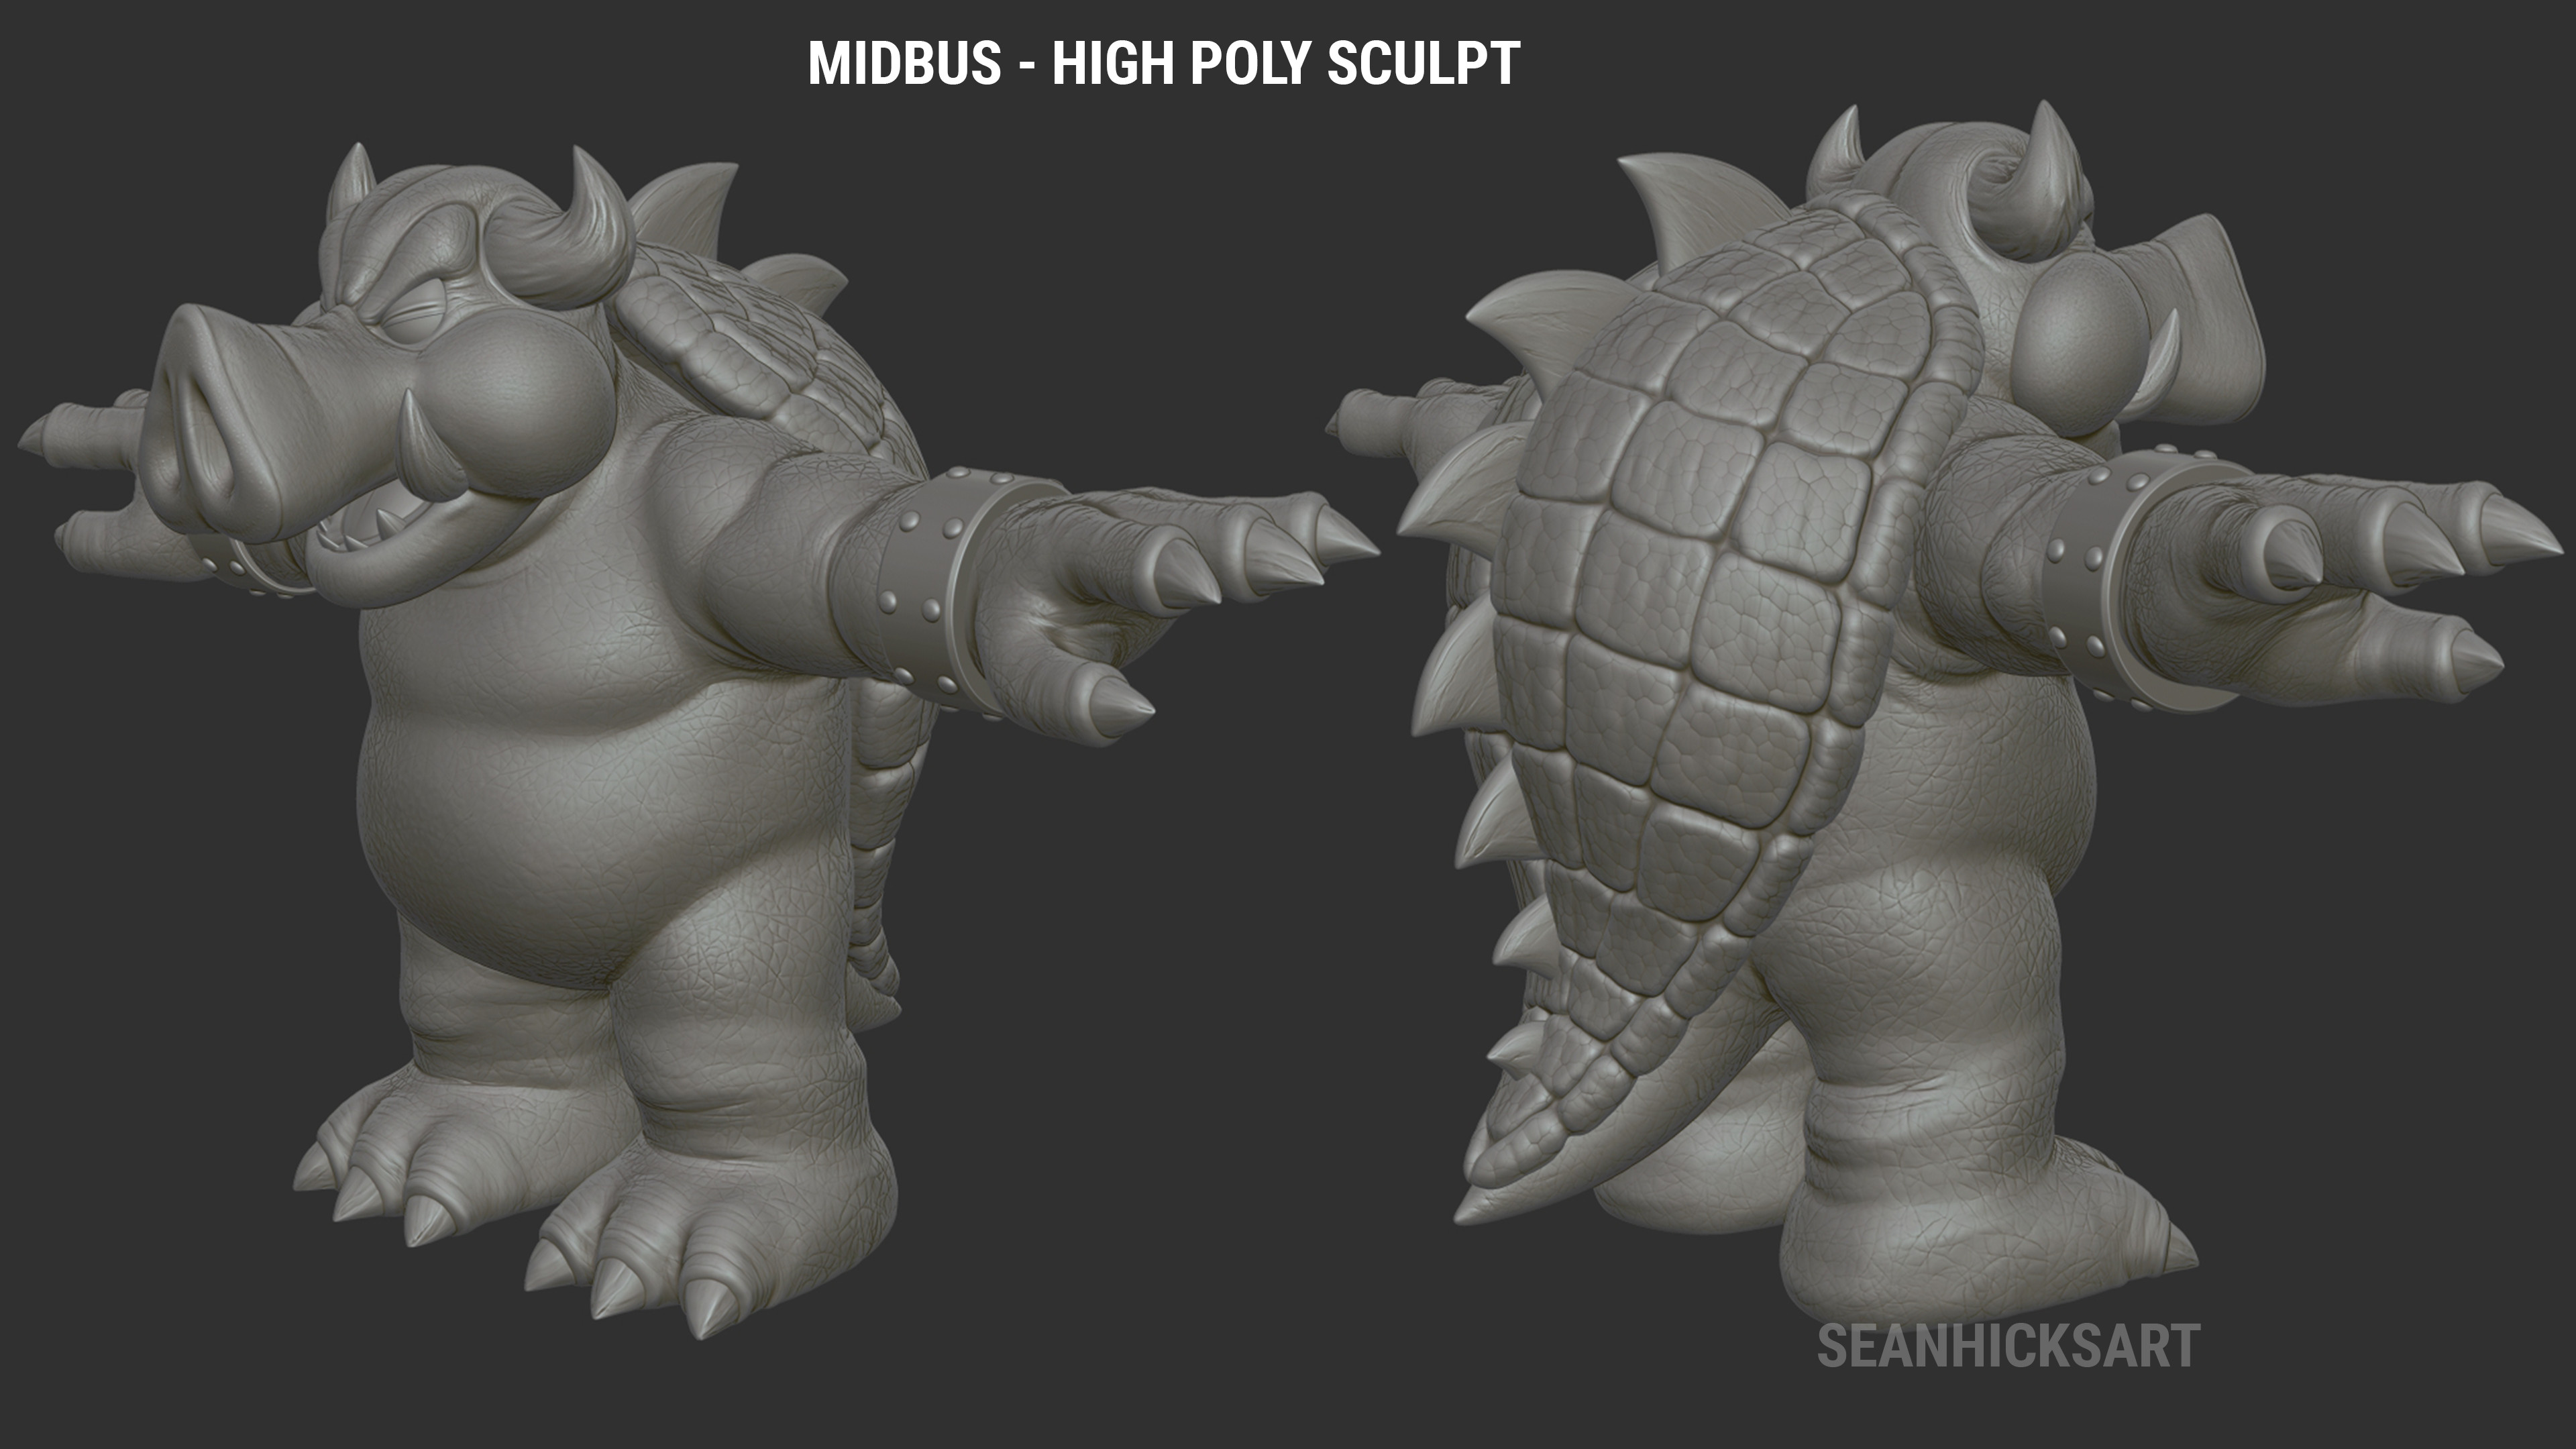 High poly sculpt of Midbus in Zbrush